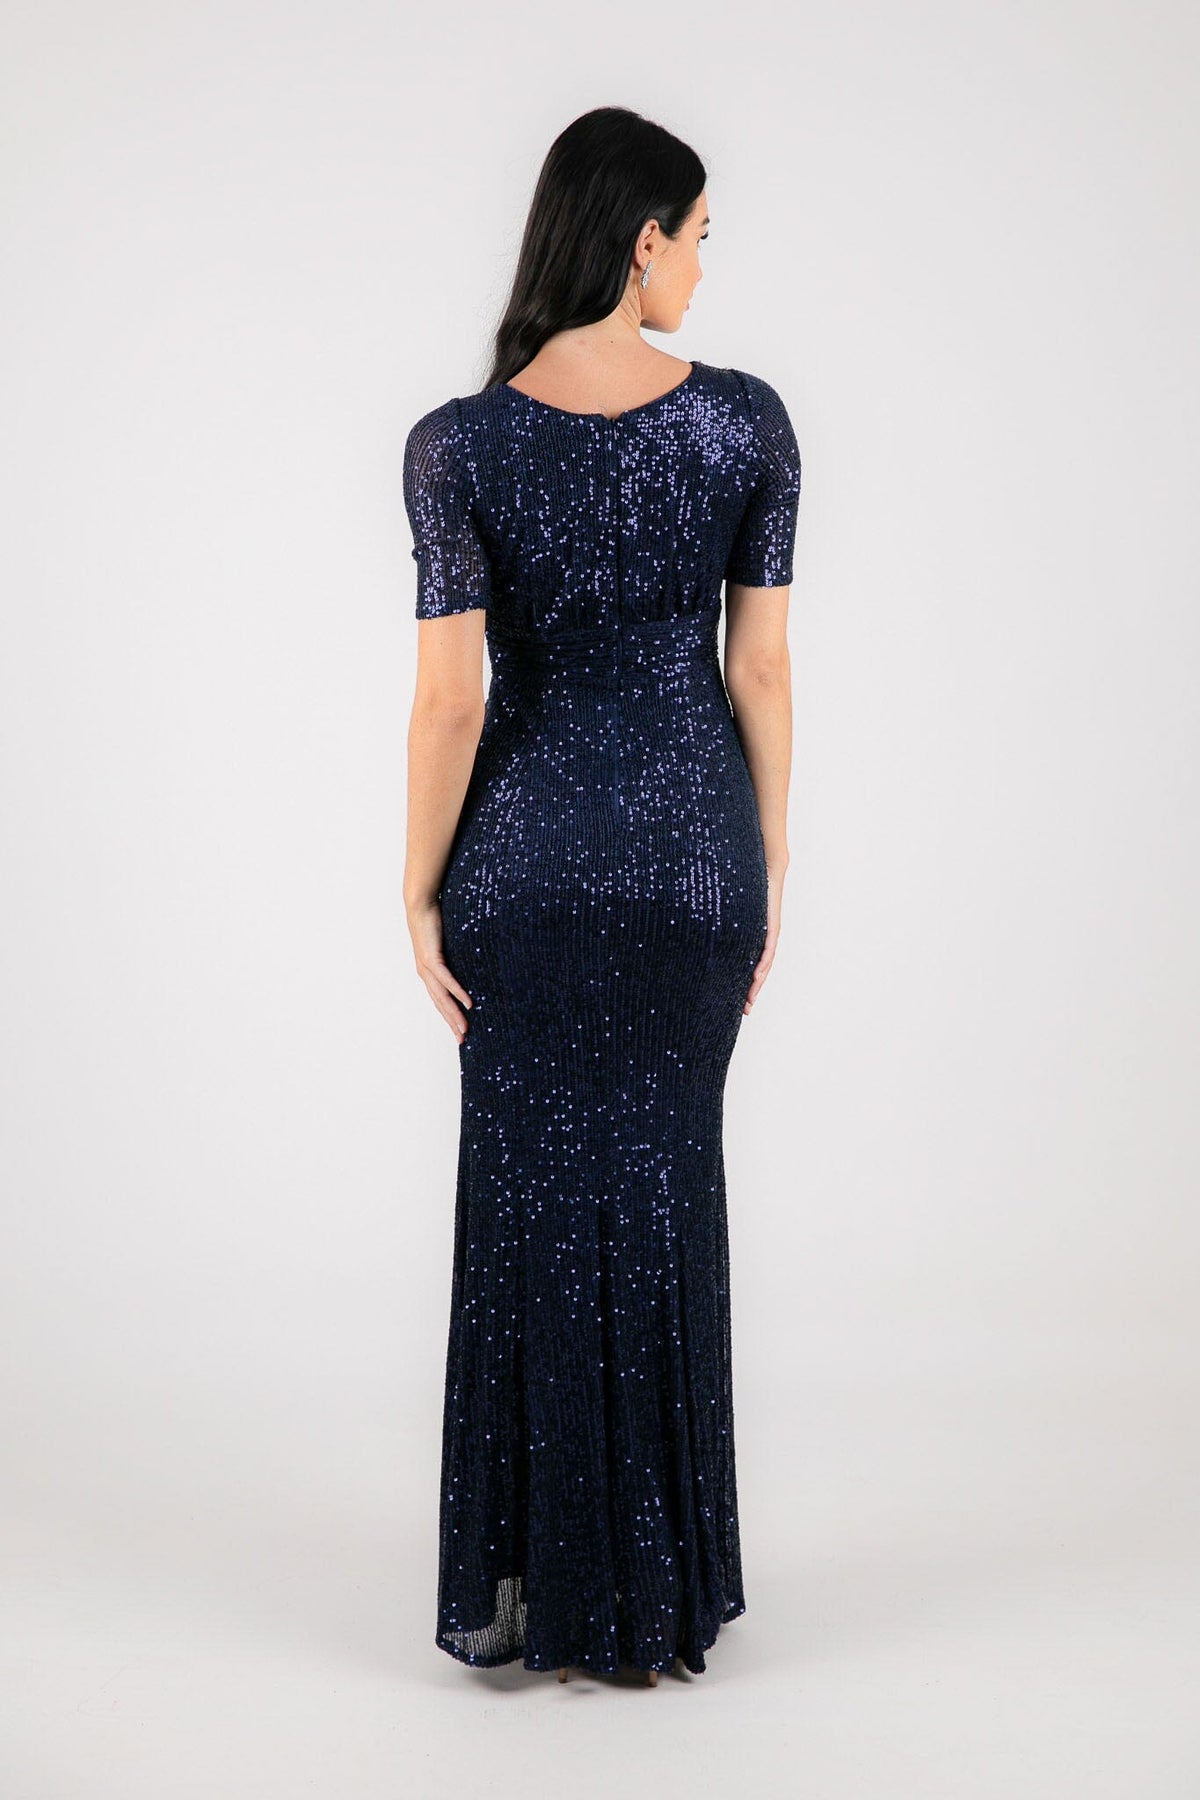 Back Image of Form Fitting Modest Navy Deep Blue Sequin Evening Maxi Dress with Round Neckline, Fitted Short Sleeves and Side Slit